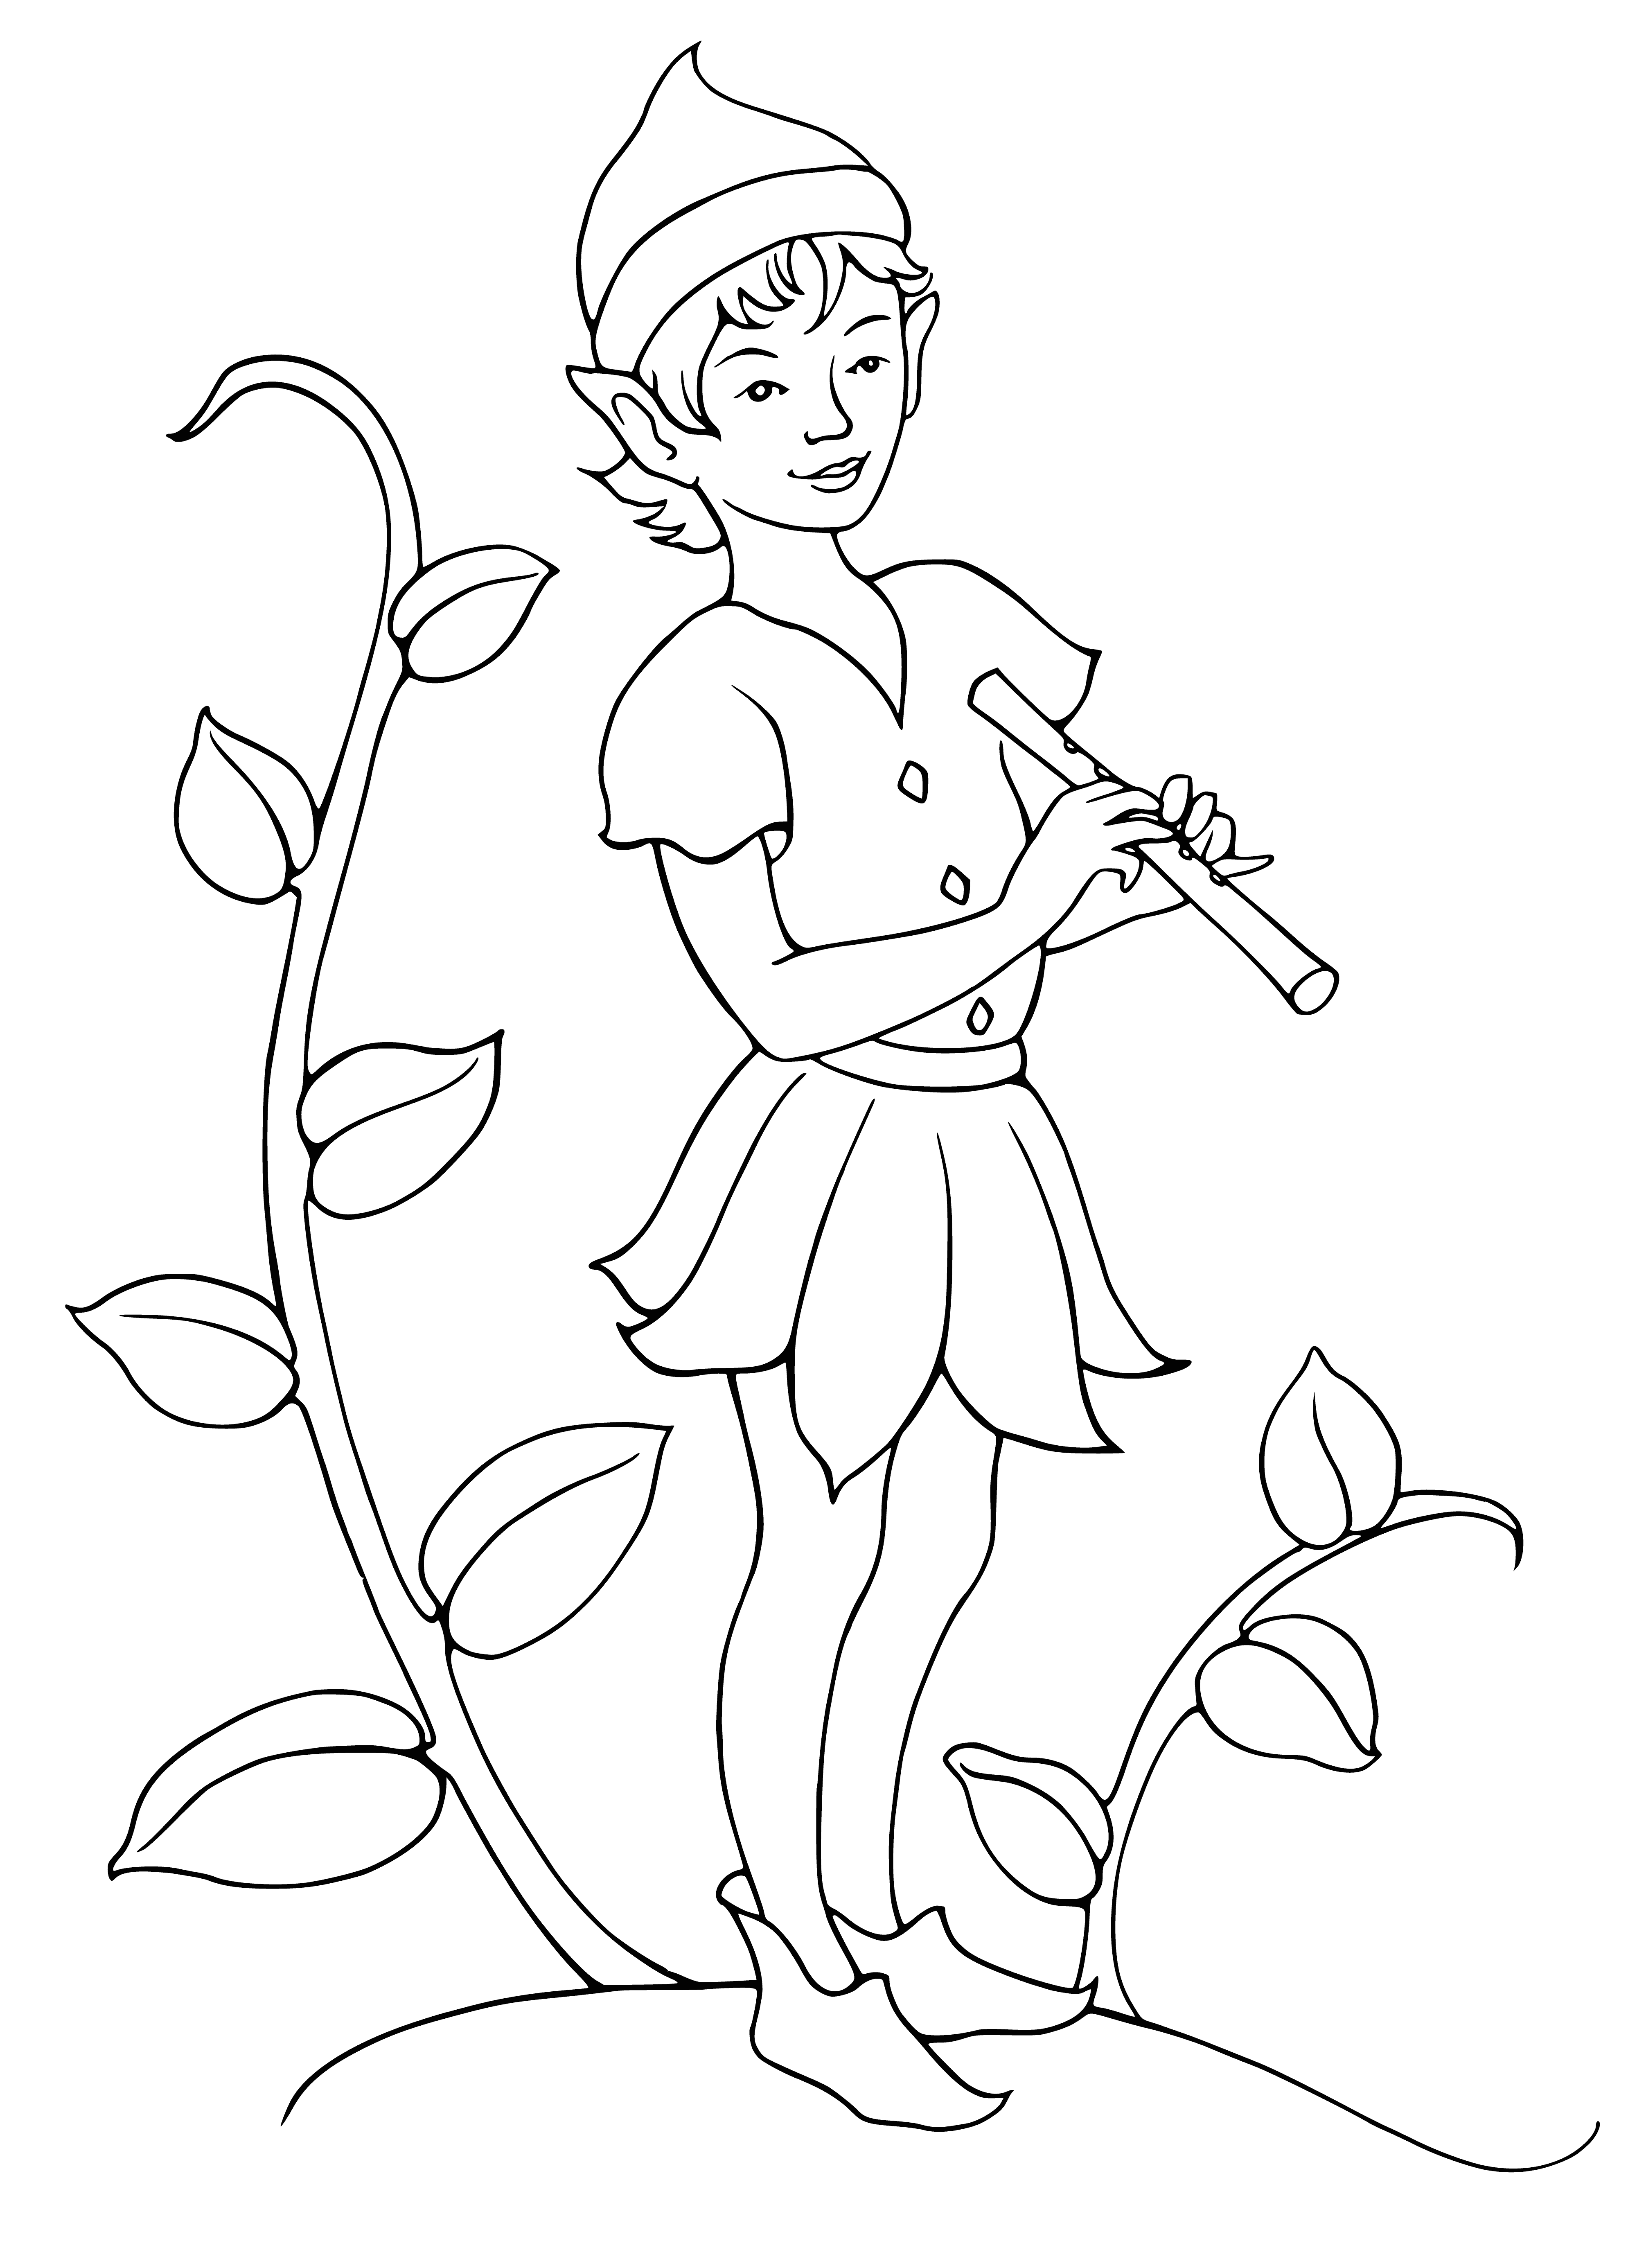 Elf boy with a pipe in his hands coloring page